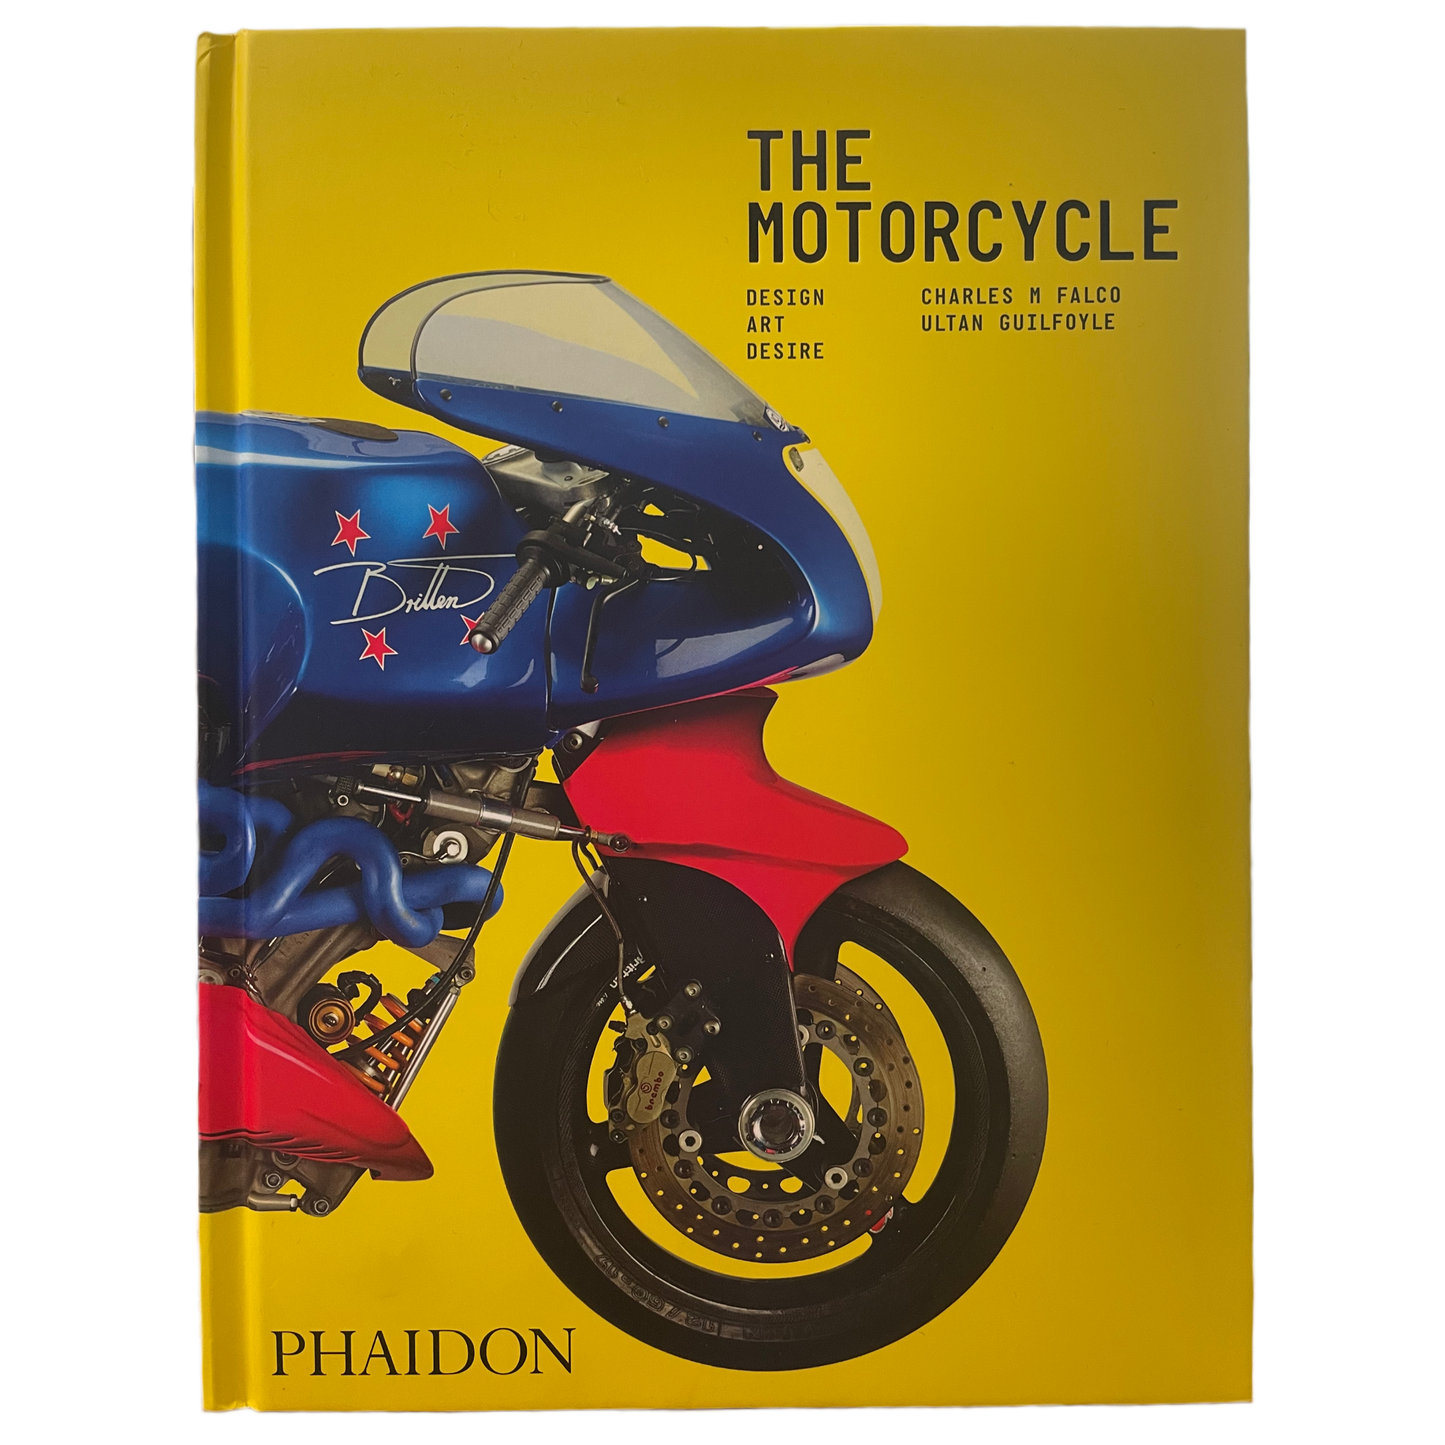 The Motorcycle: Design, Art, Desire by Charles M. Falco & Ultan Guilfoyle